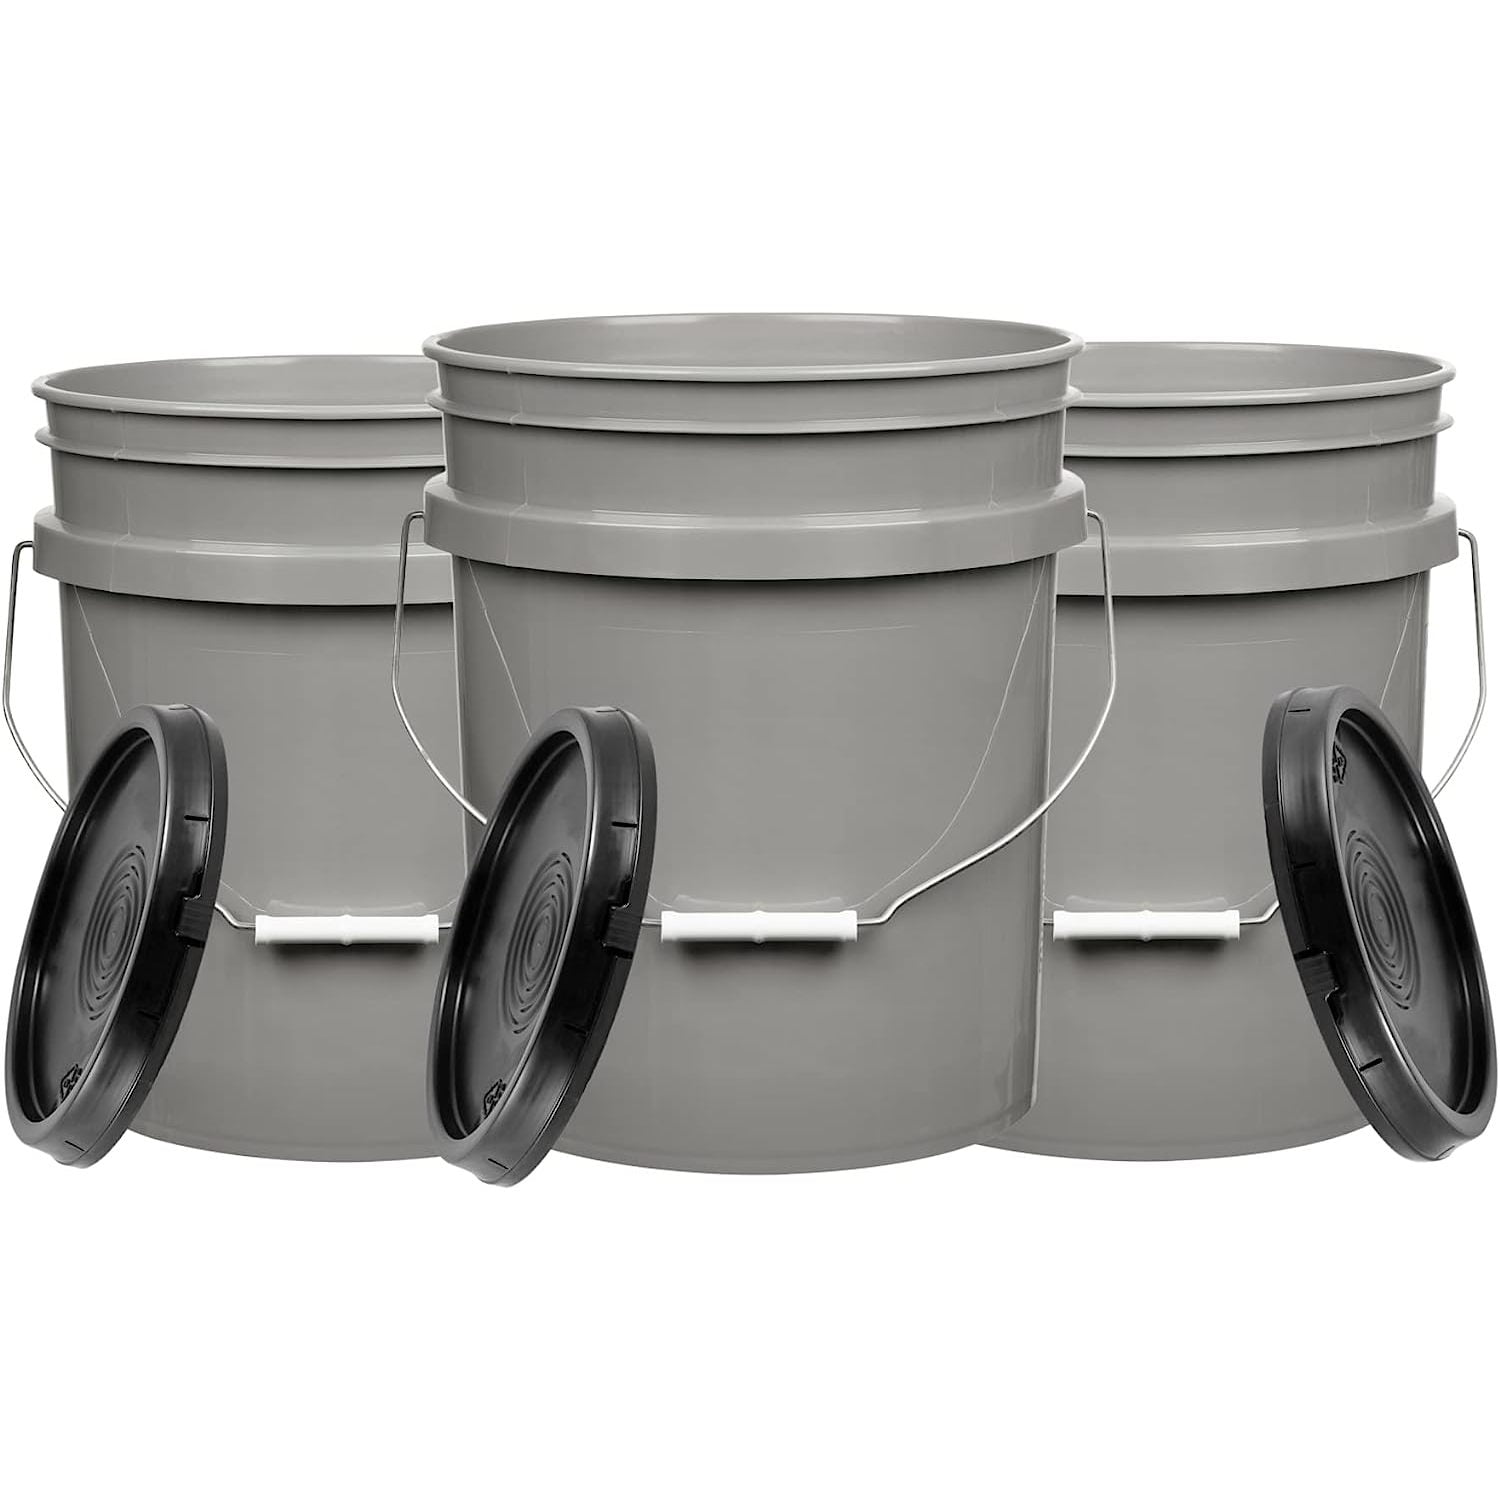 5 Gallon Black HDPE Plastic Un Rated Bucket (Lid Not Included) - Black BPA Free